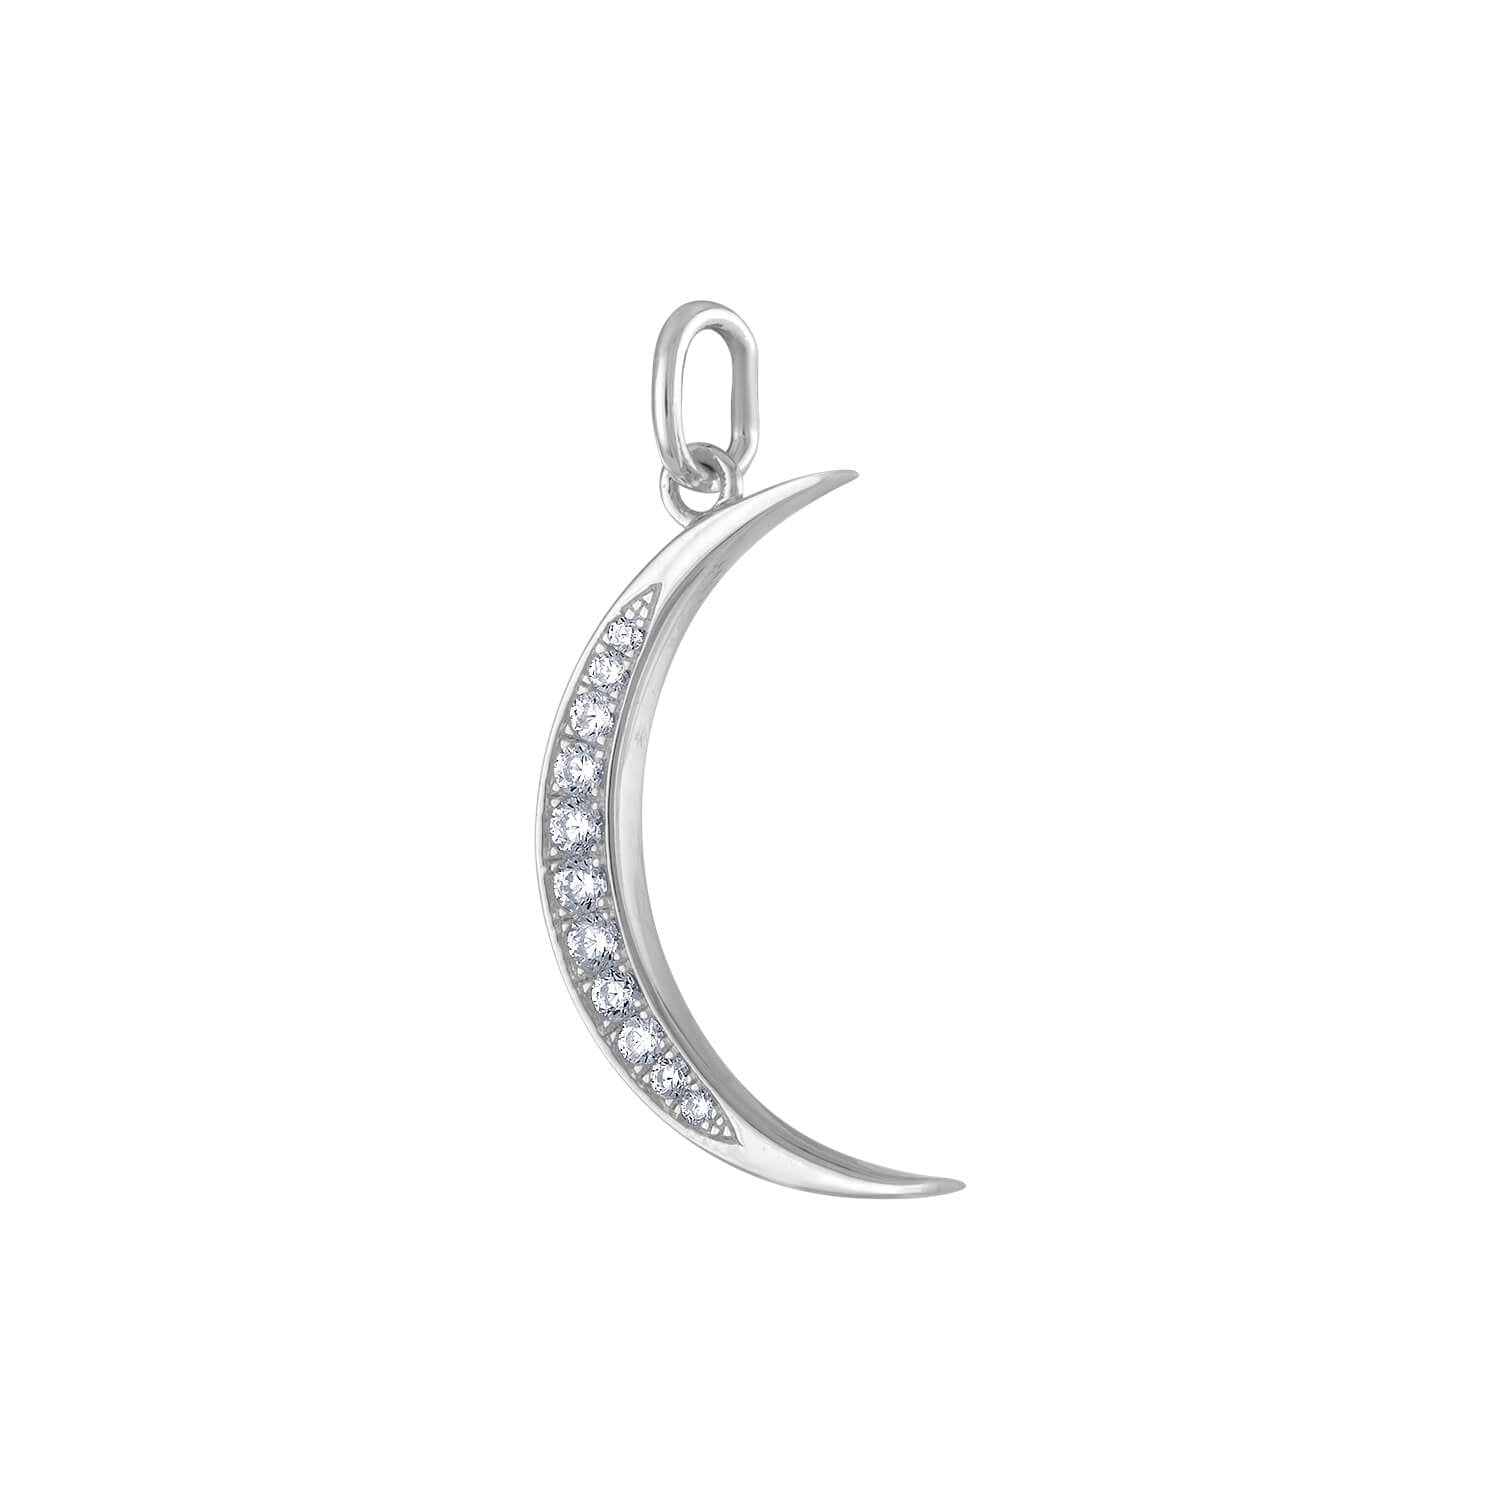 Pave Moon Charm in Sterling Silver